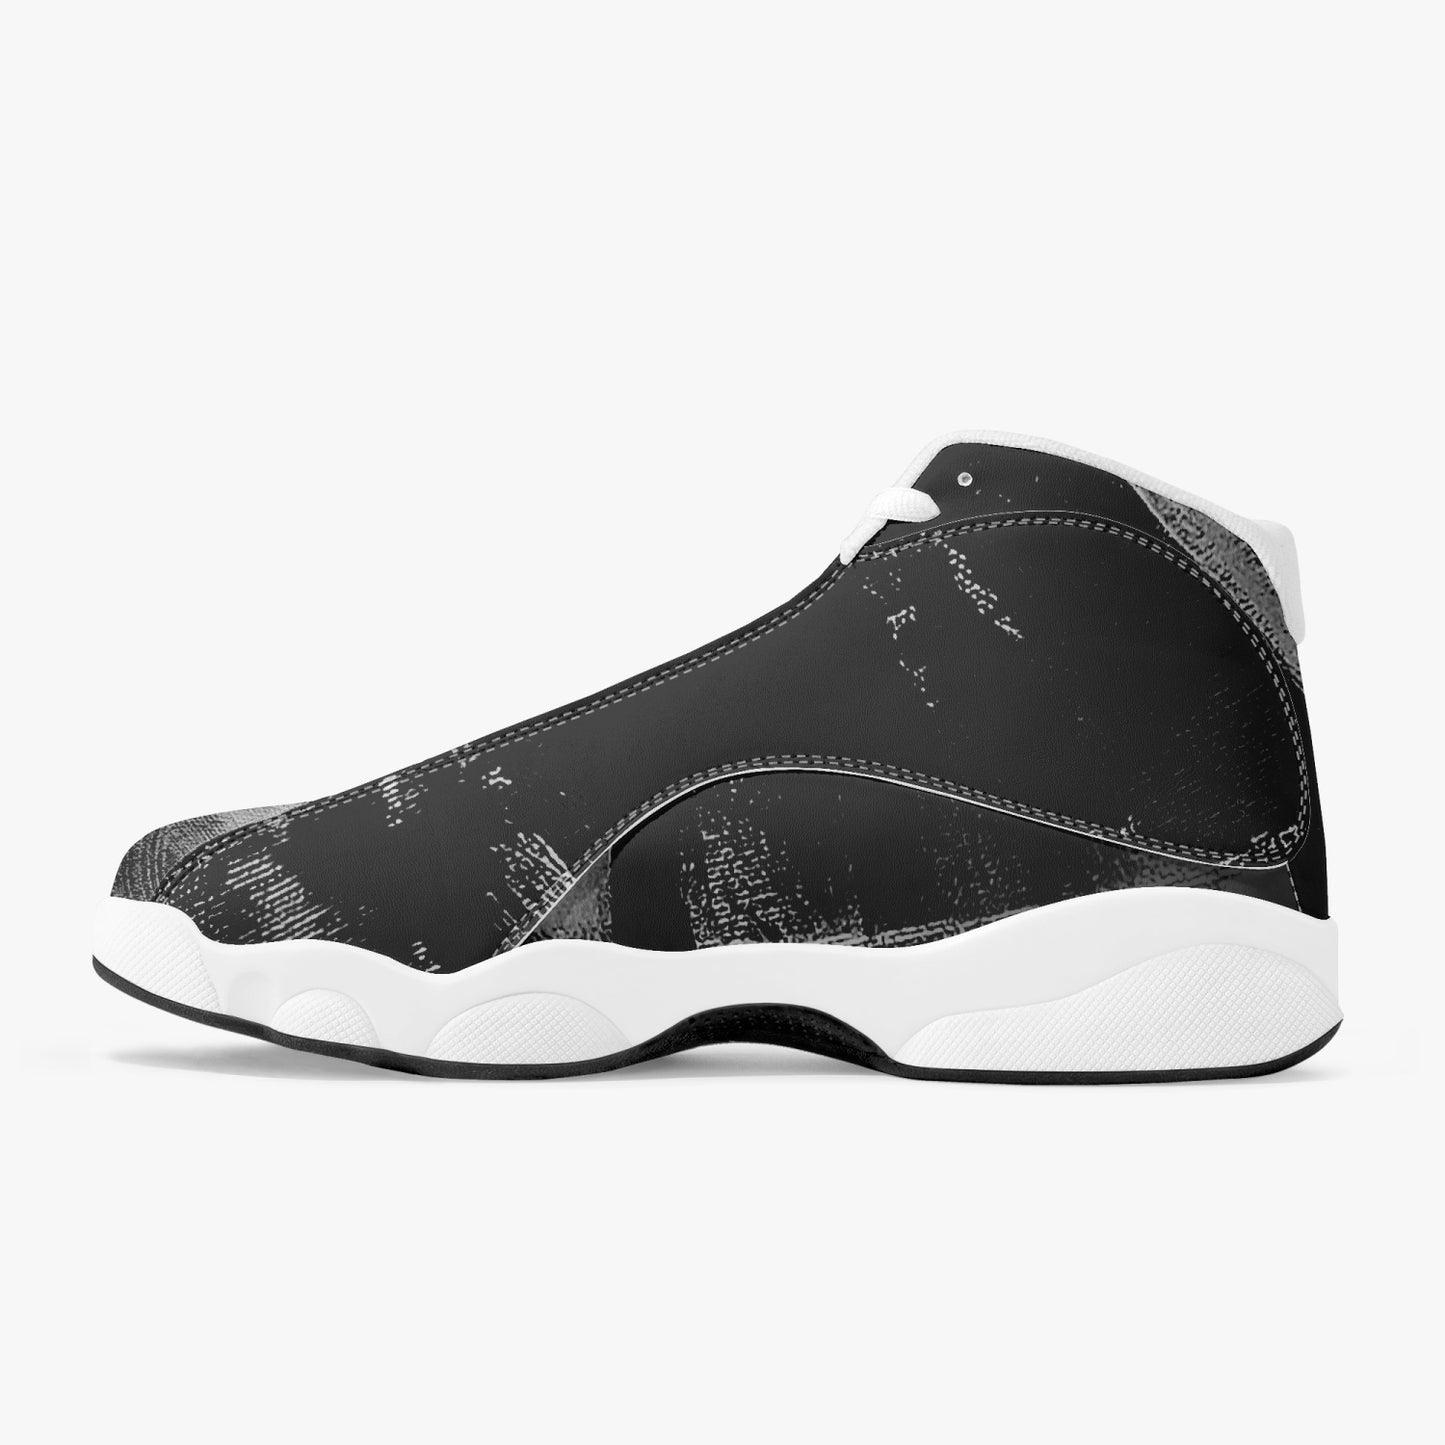 High-end leather basketball sneakers "Wak'Grey" "